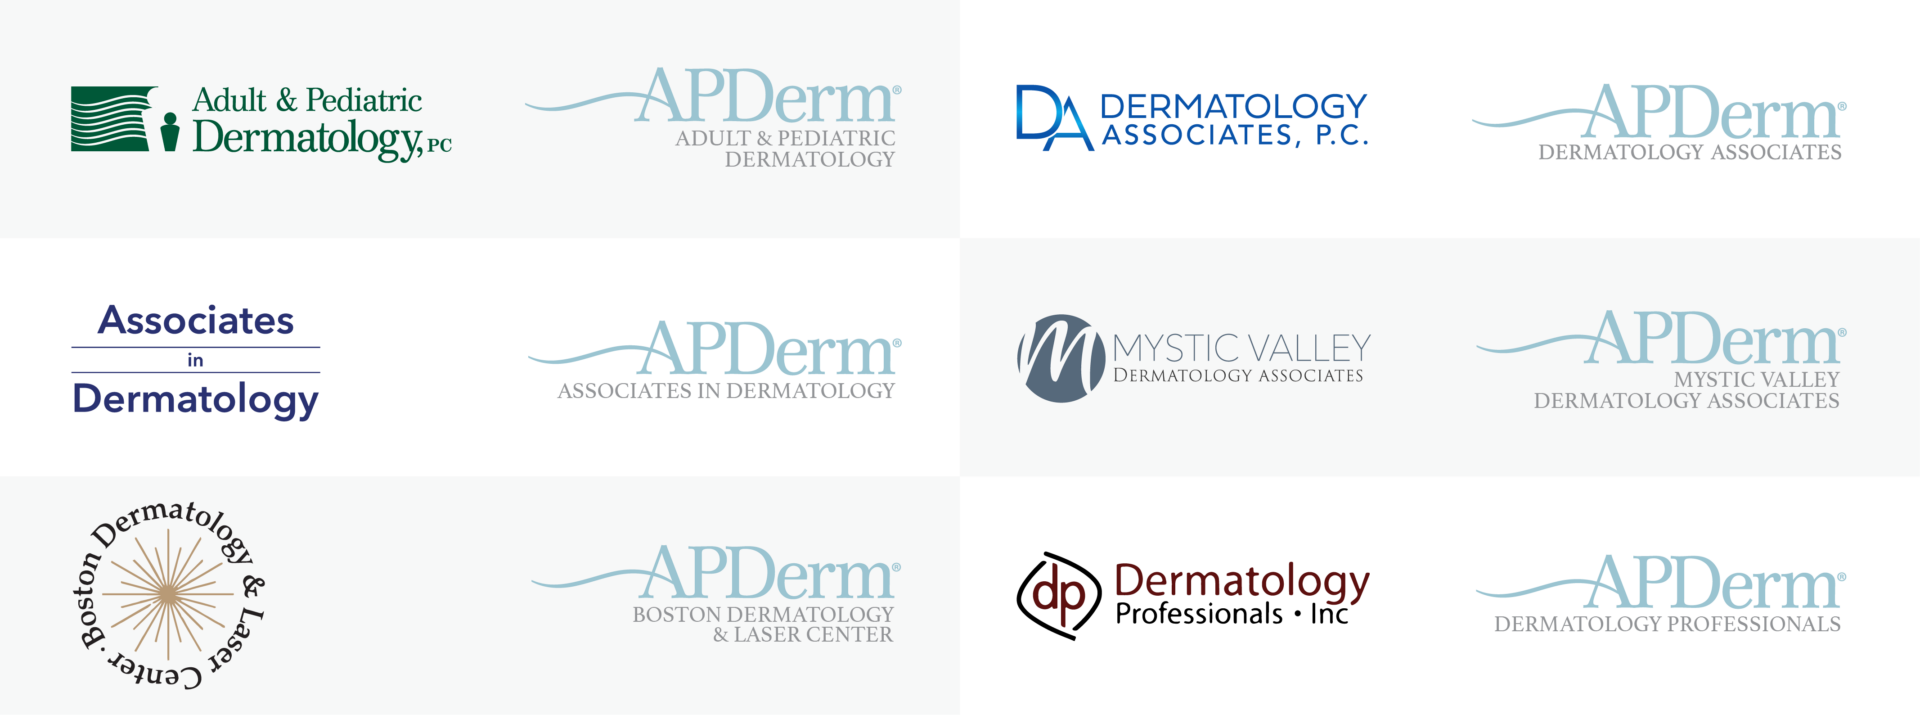 APDerm before and after logos horizontal